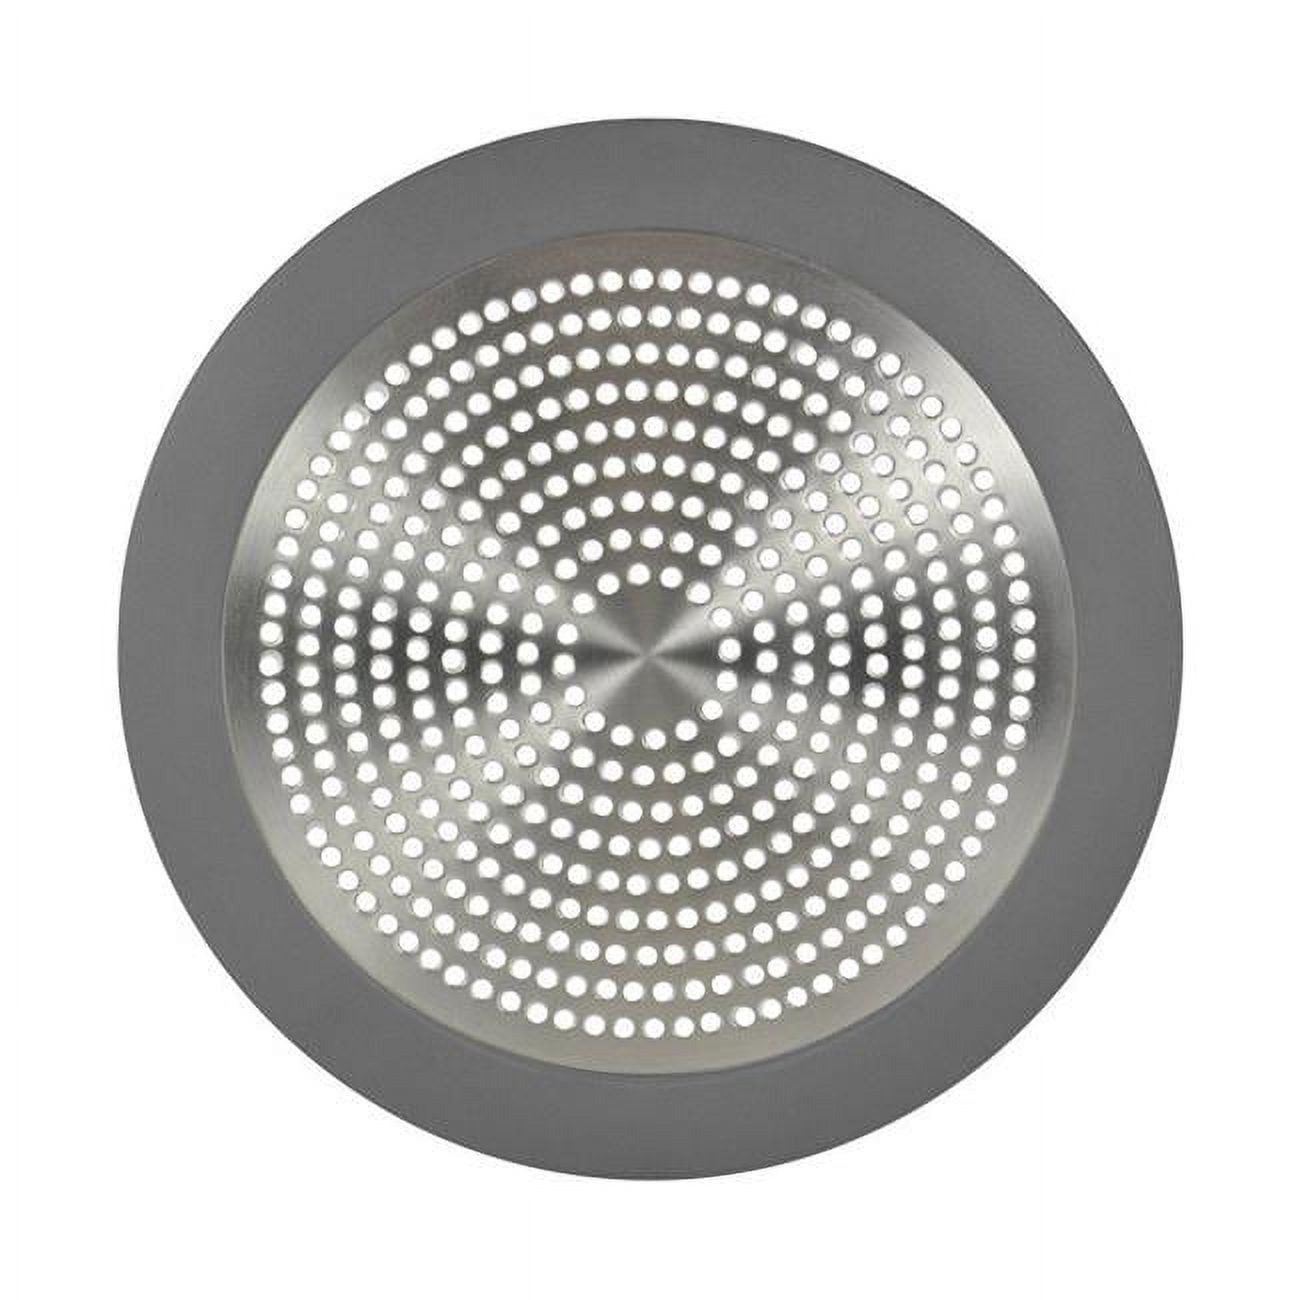 Picture of Danco 4866059 5.5 in. Dia Shower Drain Strainer Brushed Nickel Stainless Steel